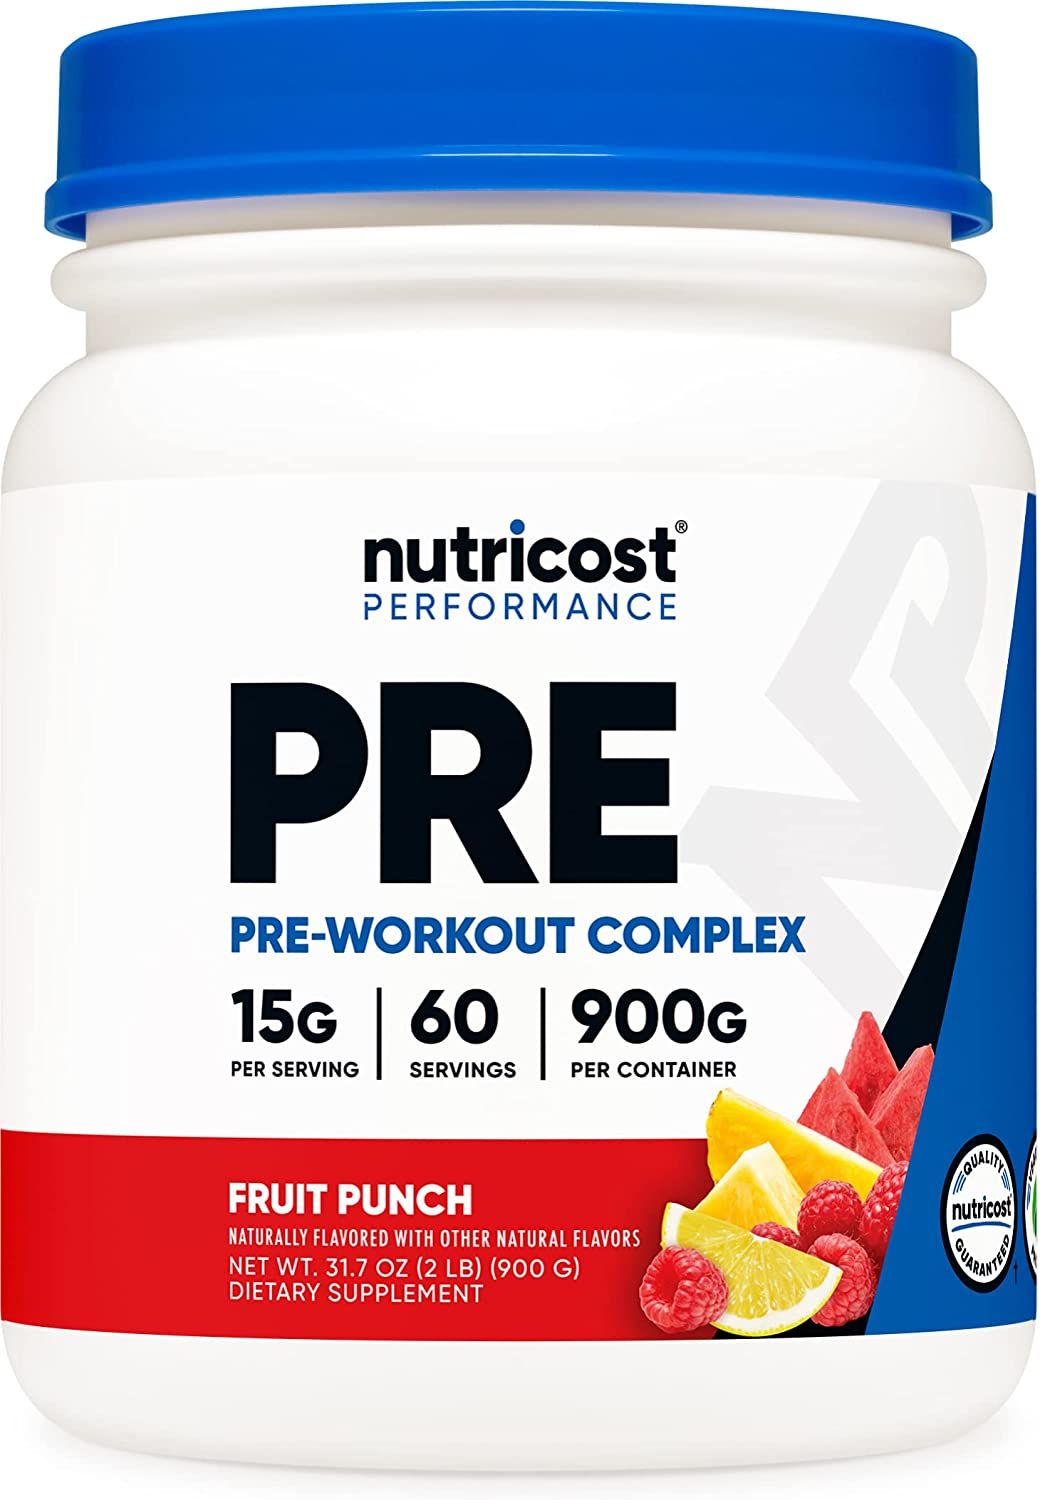 Amazon.com: Nutricost Pre-Workout pre workout Powder Complex, Fruit Punch, 60 Servings, Vegetarian, Non-GMO and Gluten Free : Health & Household $27.32